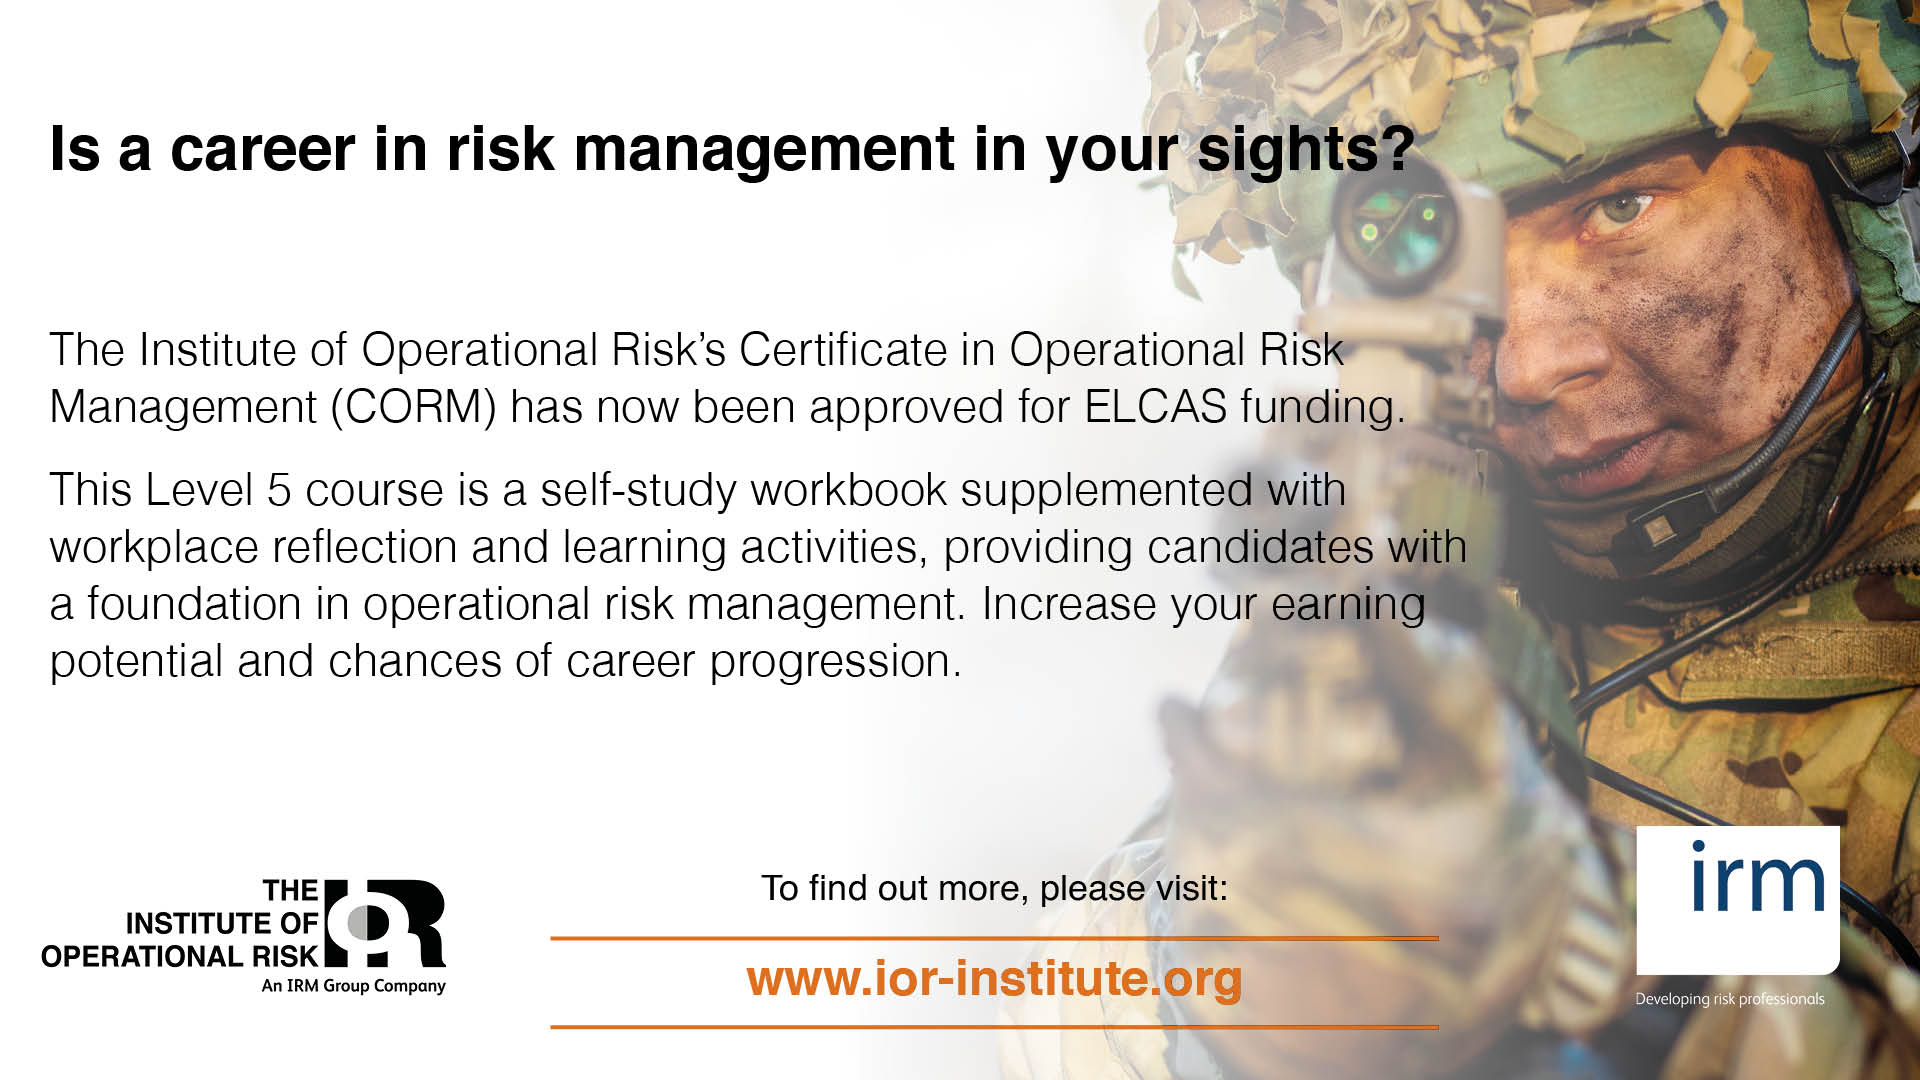 Risk Management Needs You: Is A Career In Risk In Your Sights?